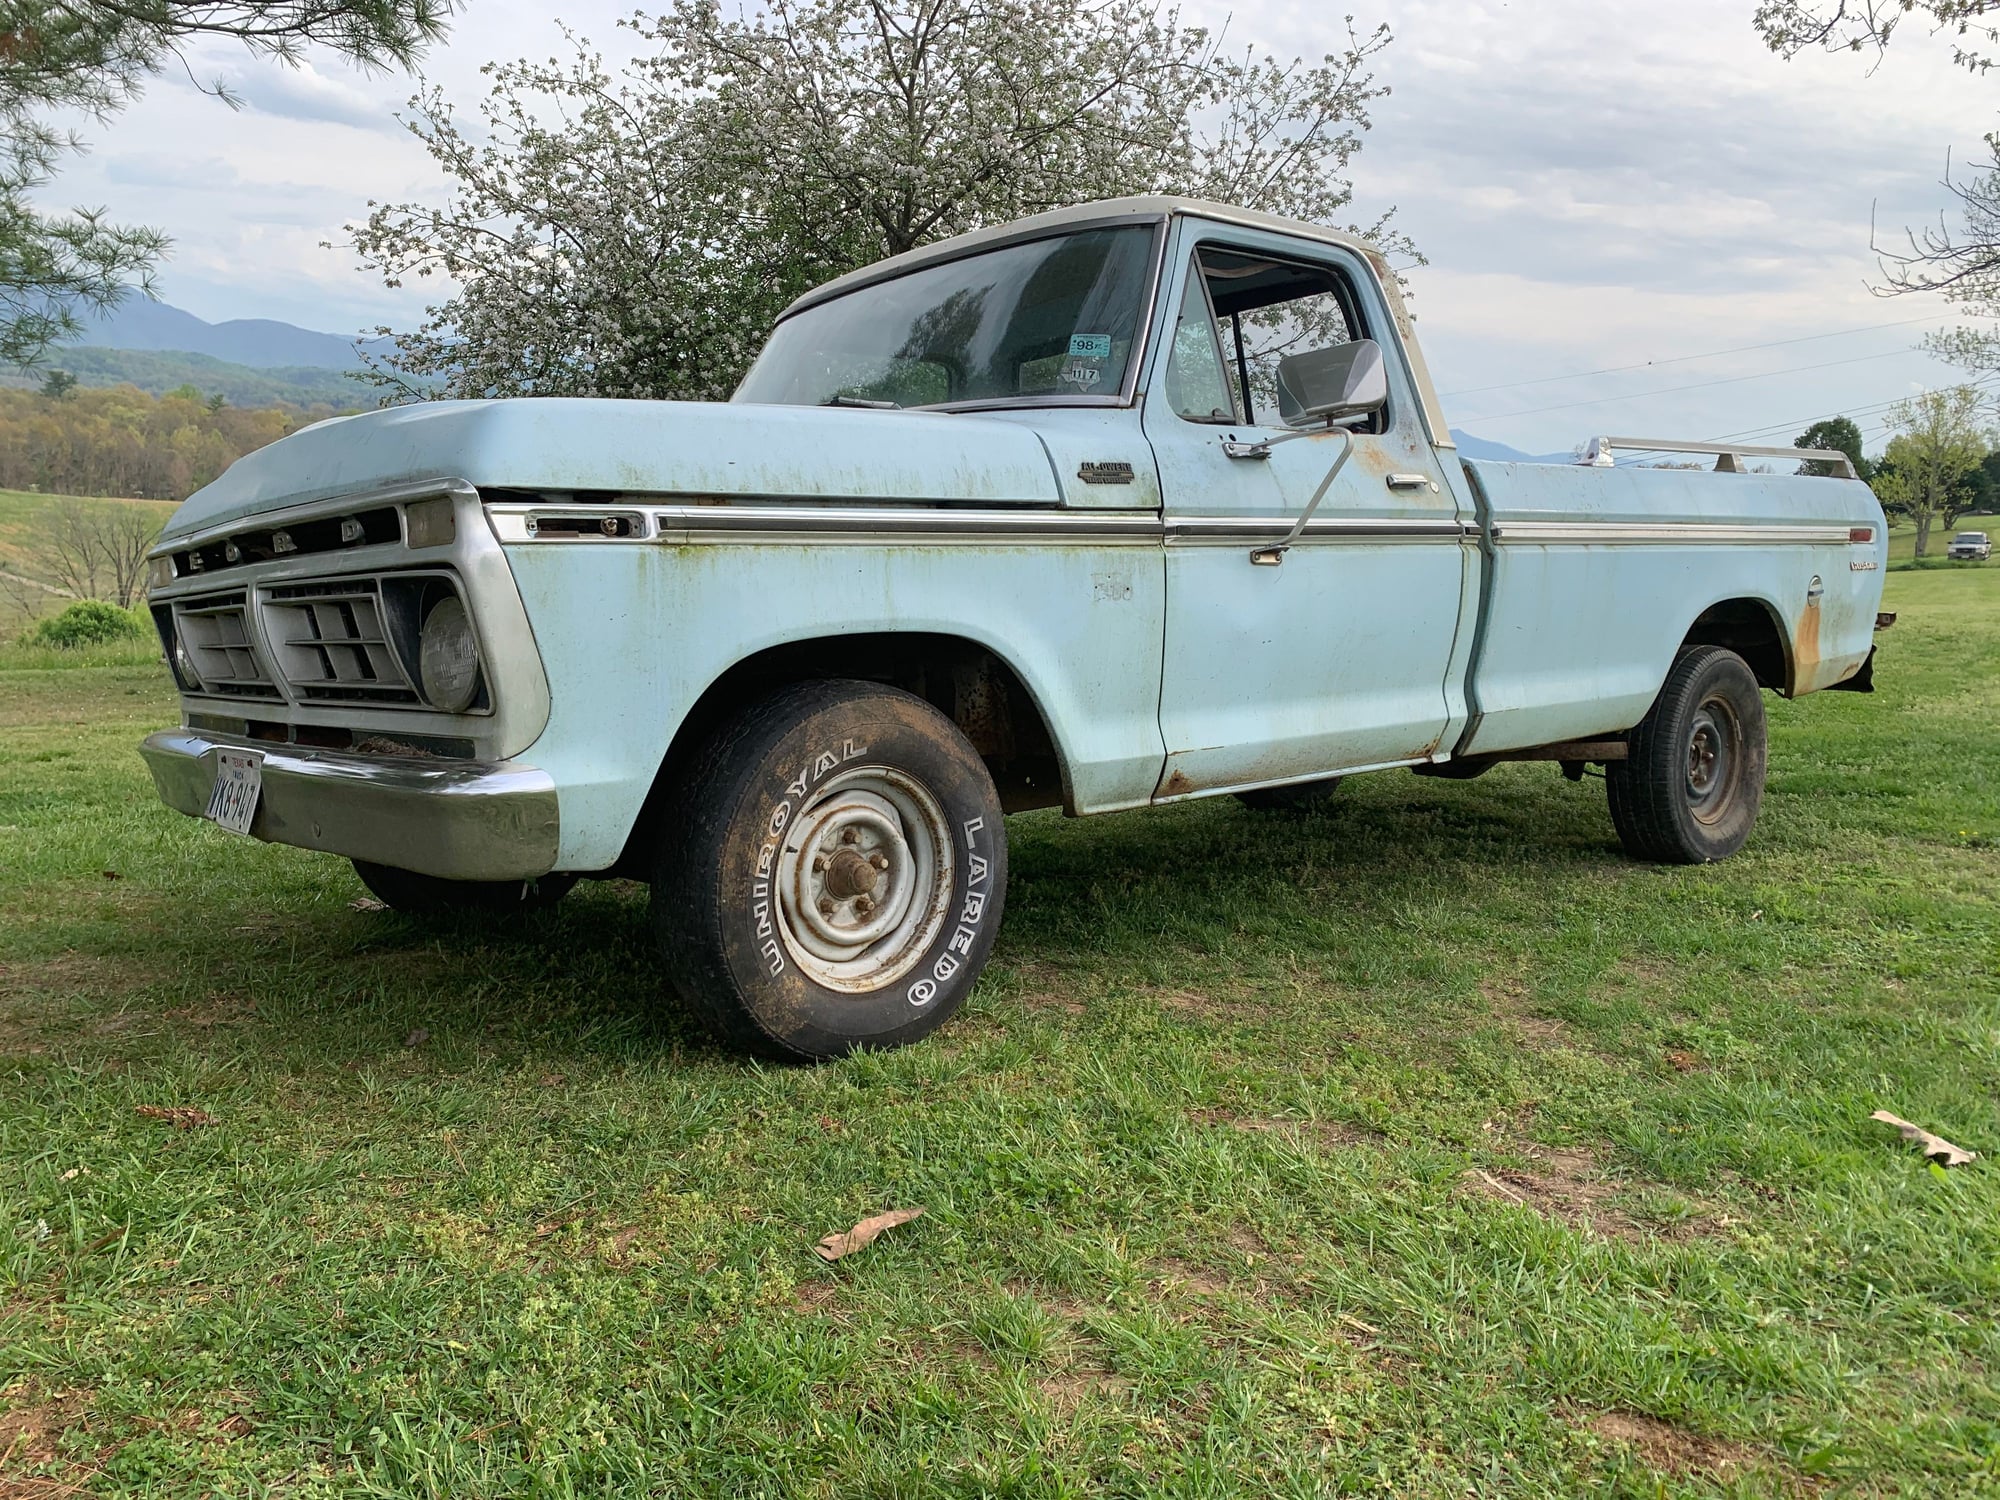 Craigslist find of the week! - Page 243 - Ford Truck ...